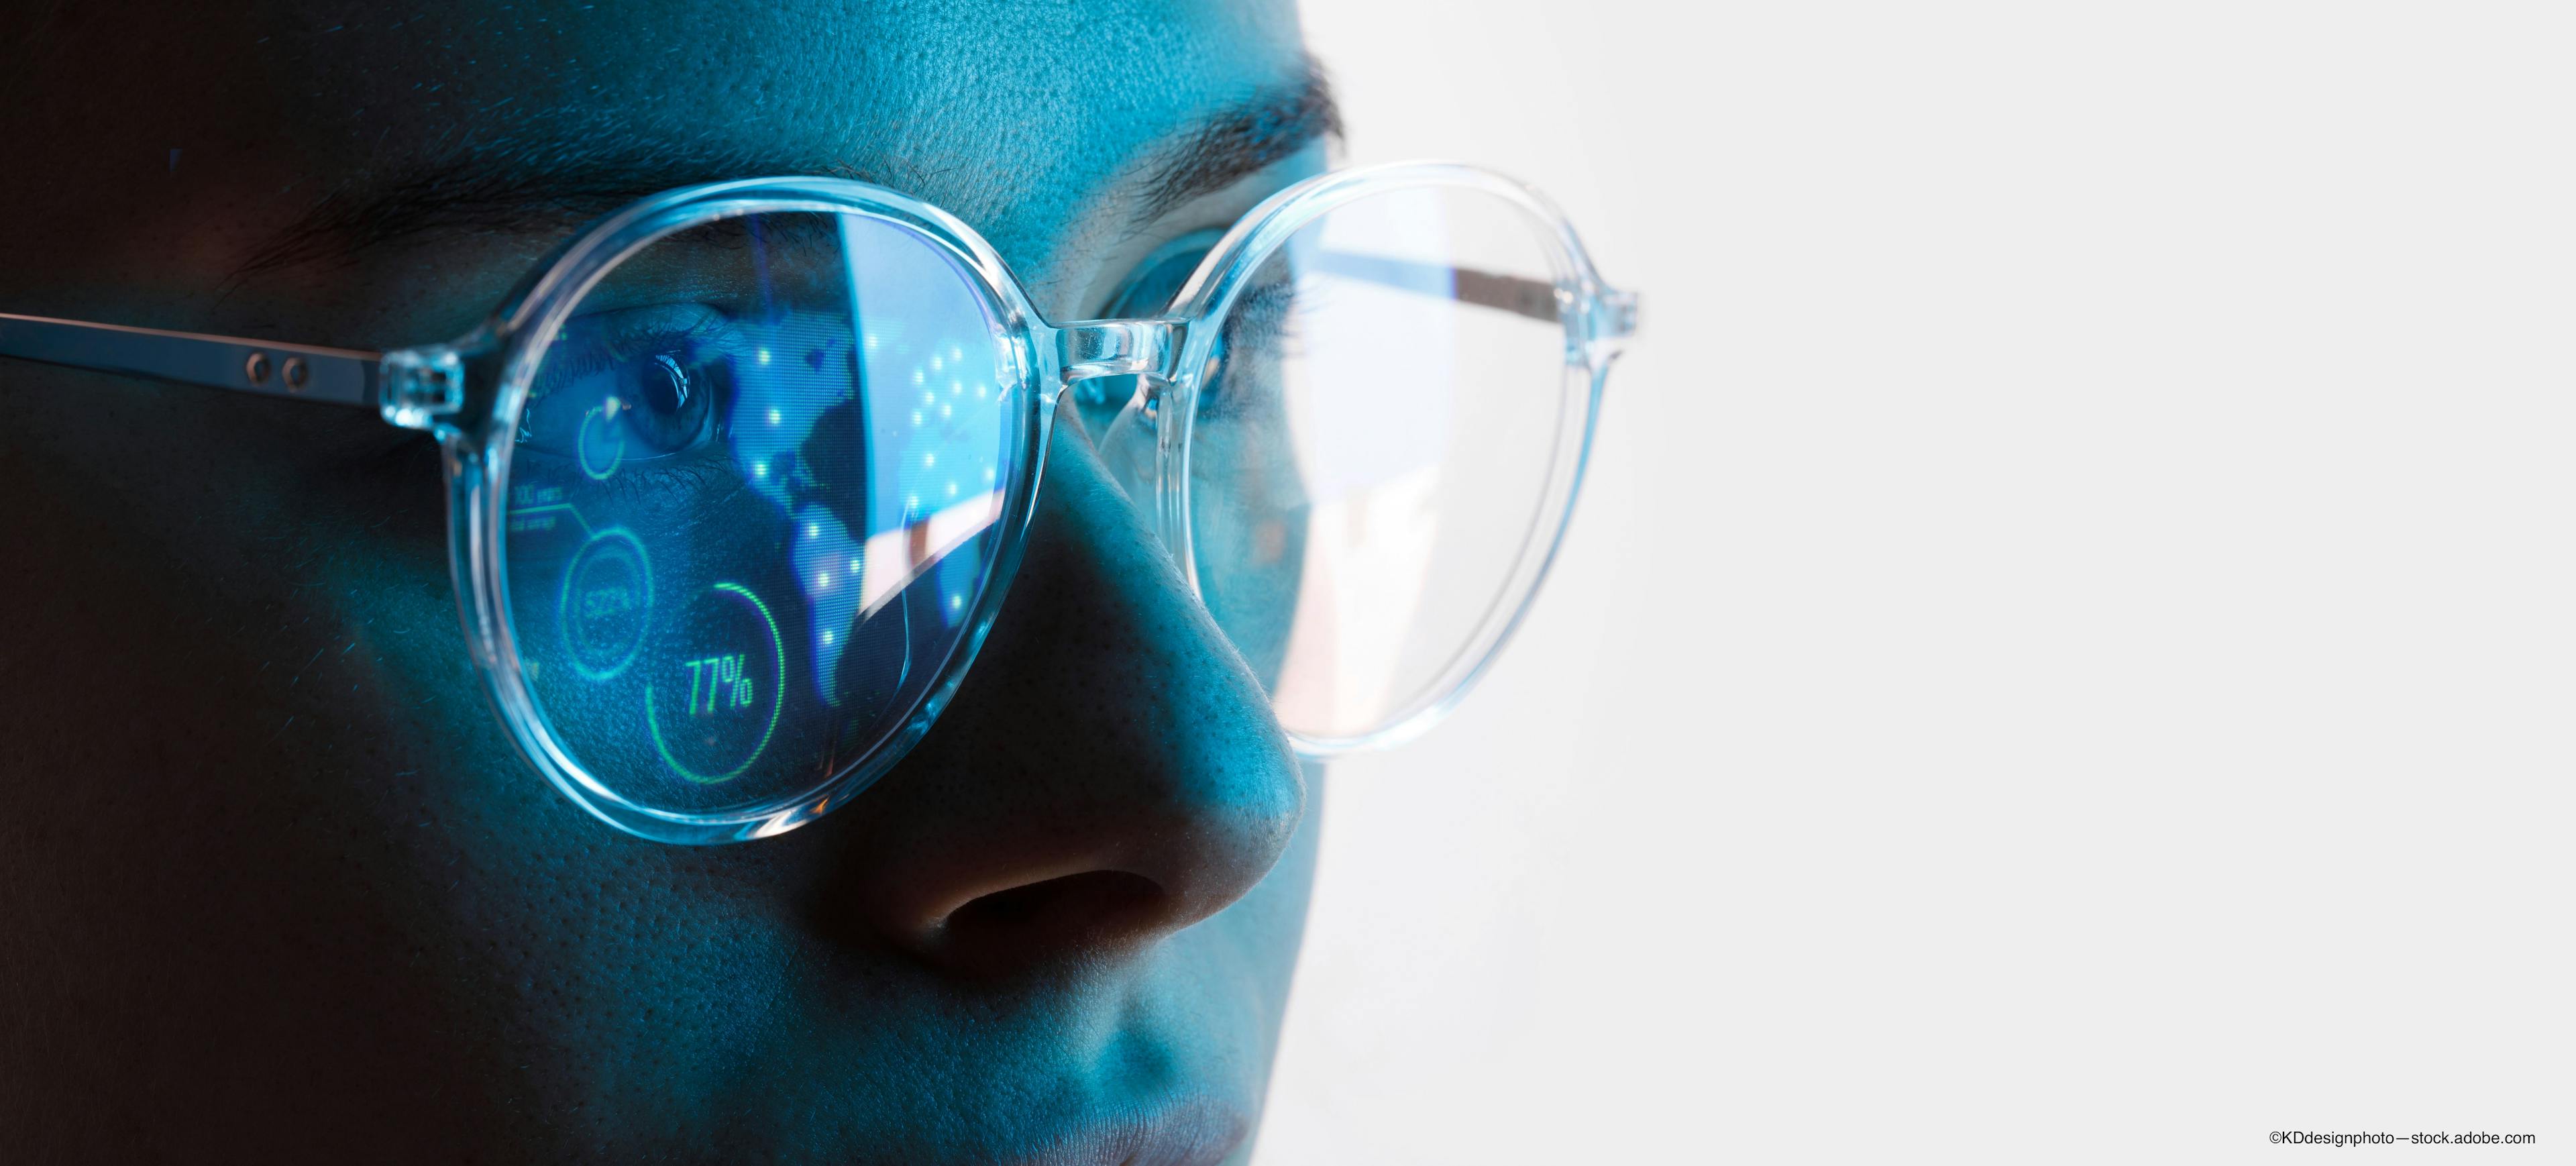 augmented reality glasses concept new prototype unveiled at Vision Expo East - KDdesignphoto